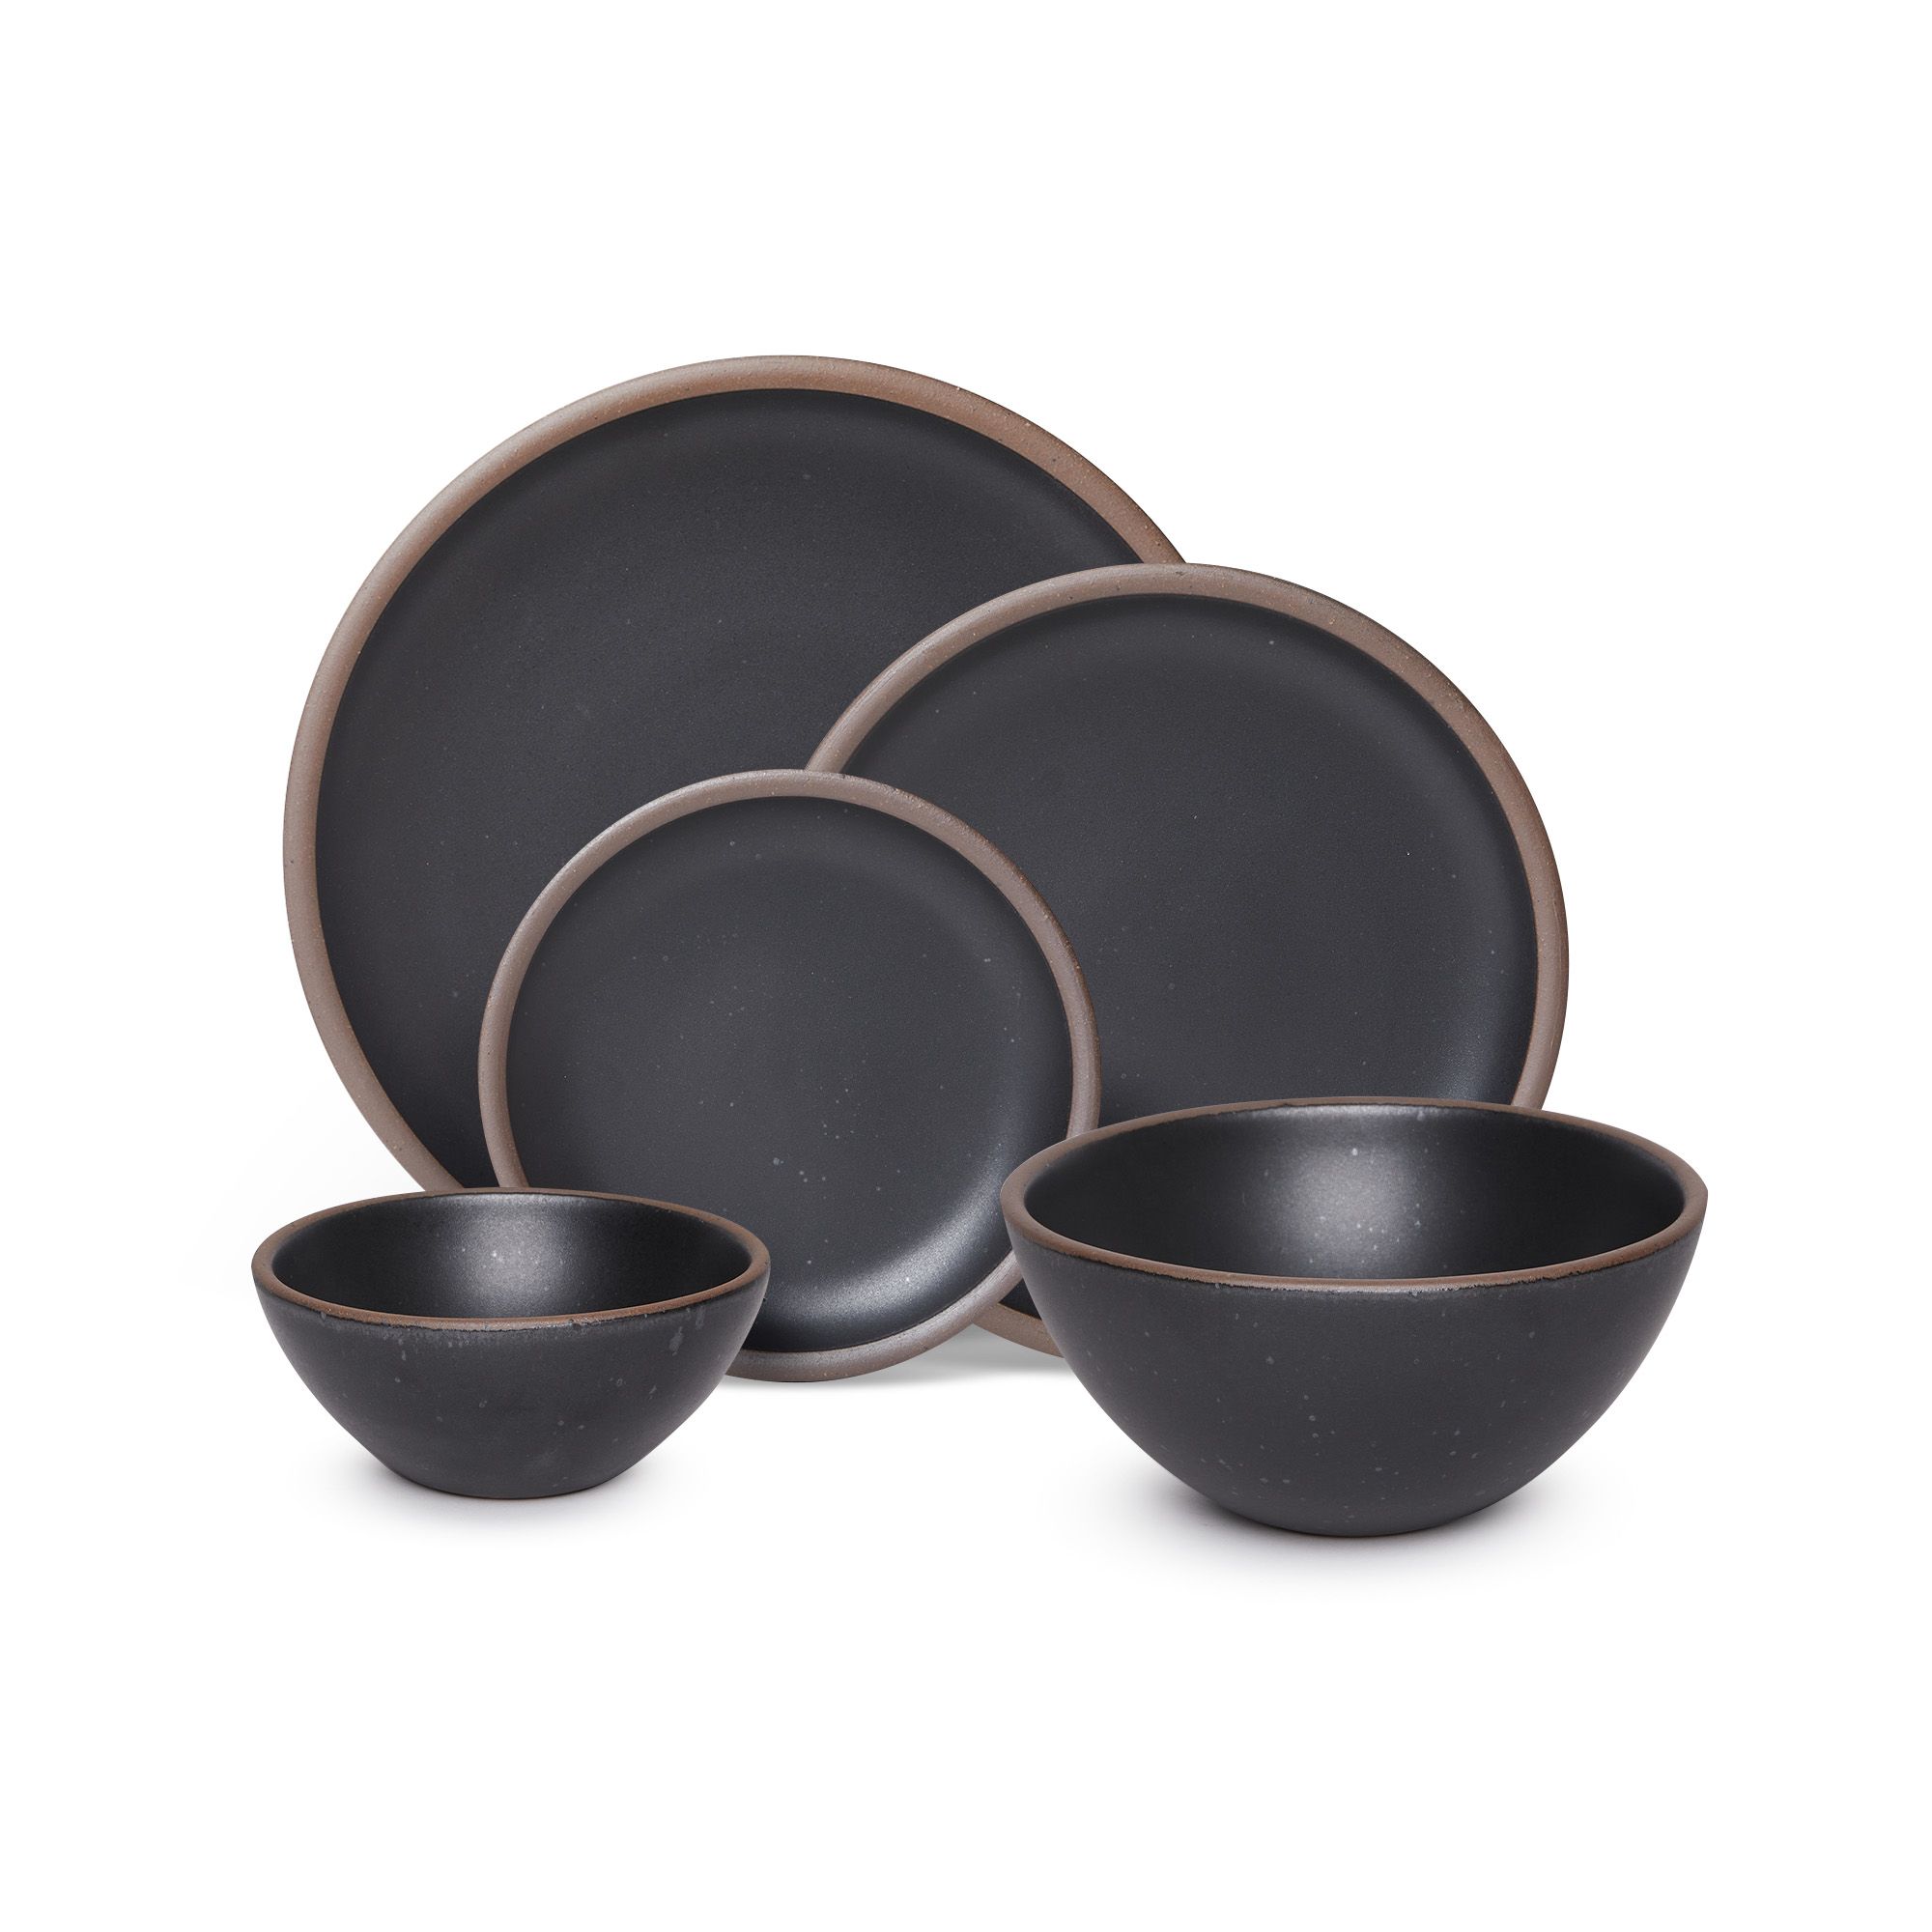 An ice cream bowl, soup bowl, cake plate, side plate and dinner plate paired together in a graphite black featuring iron speckles